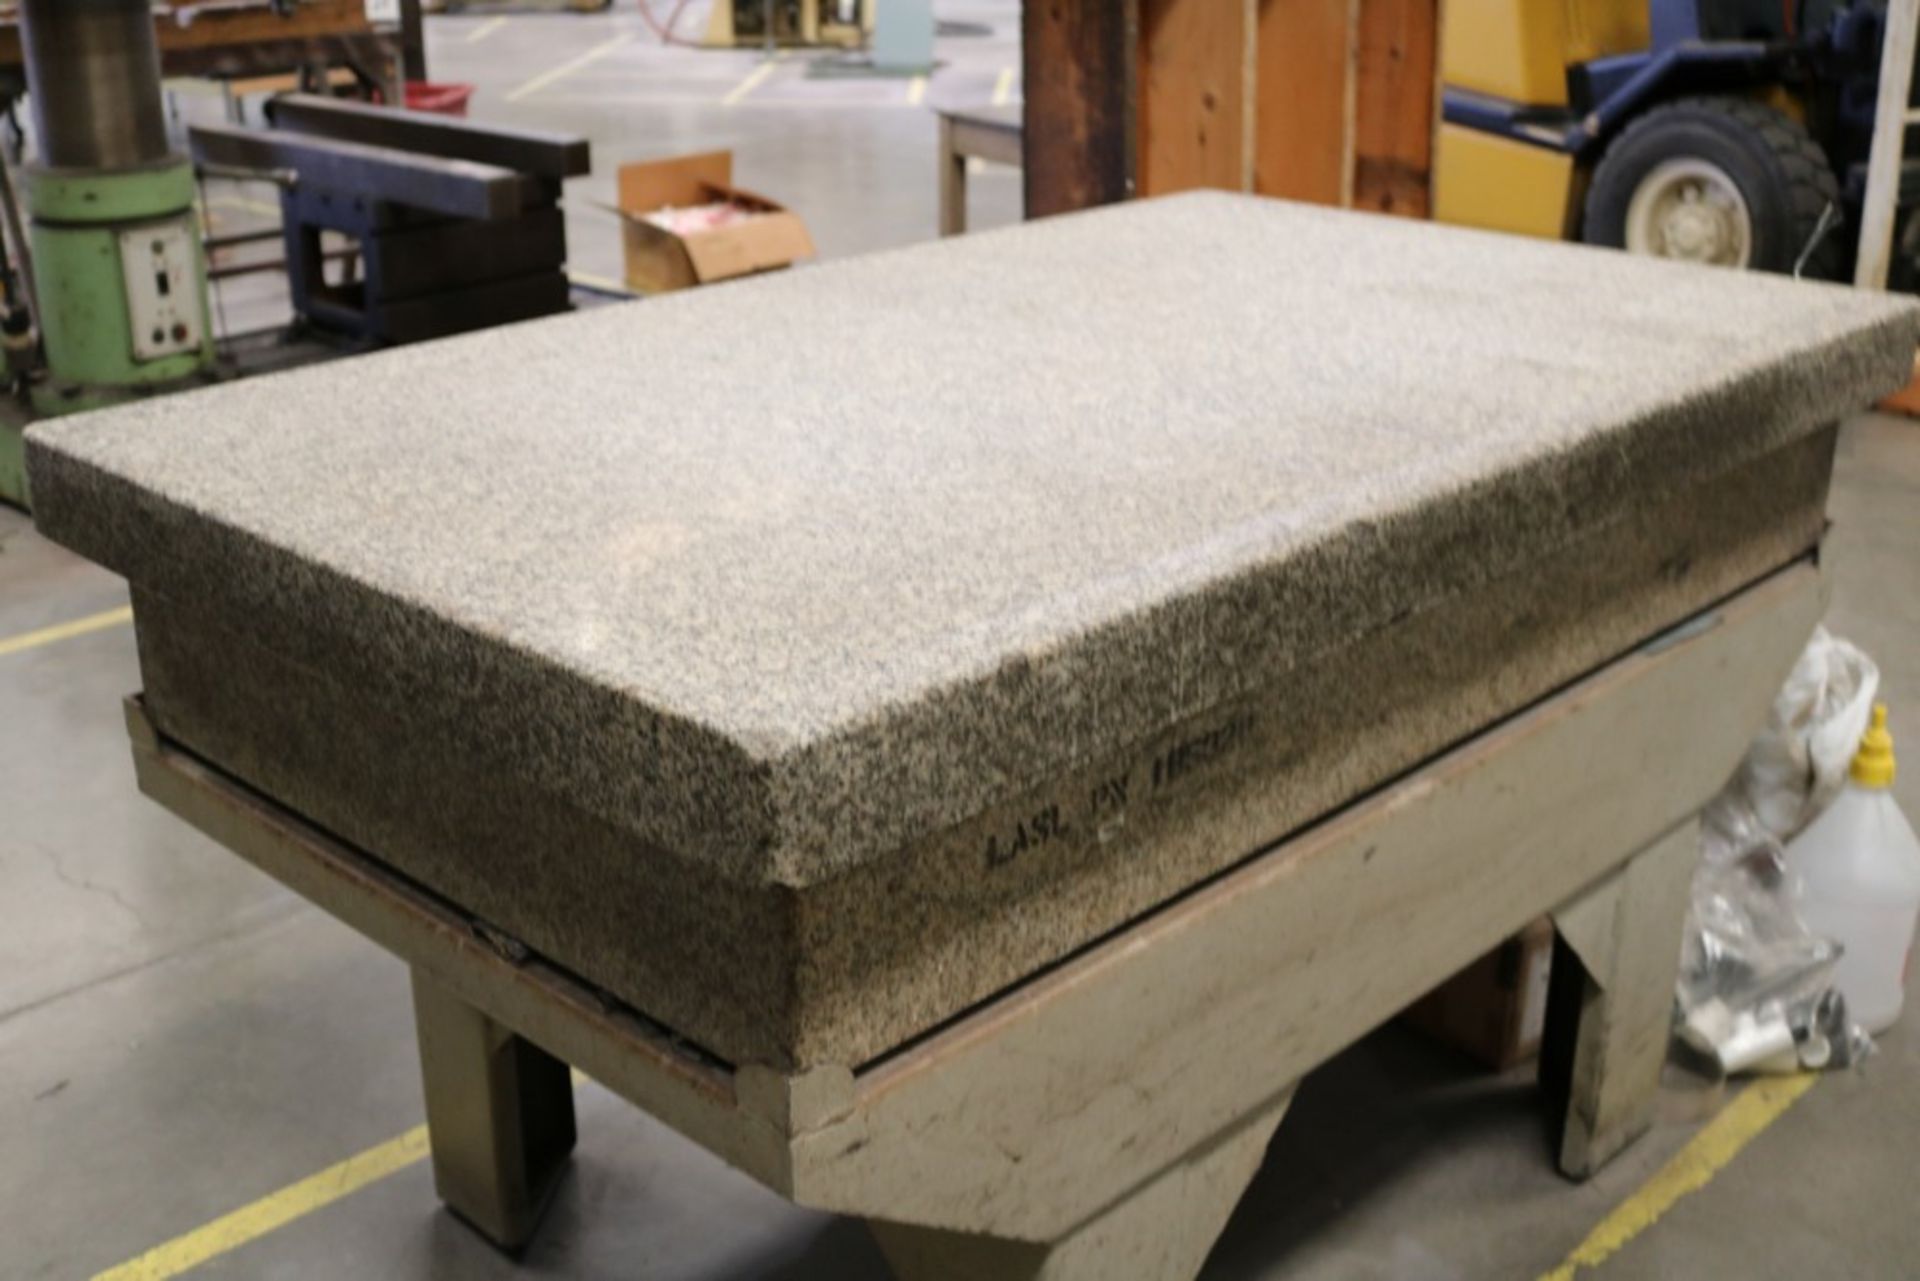 Granite Surface Inspection Table 3' x 5' x 10" Grade A, Next Required Inspection 5-5-22 - Image 2 of 4